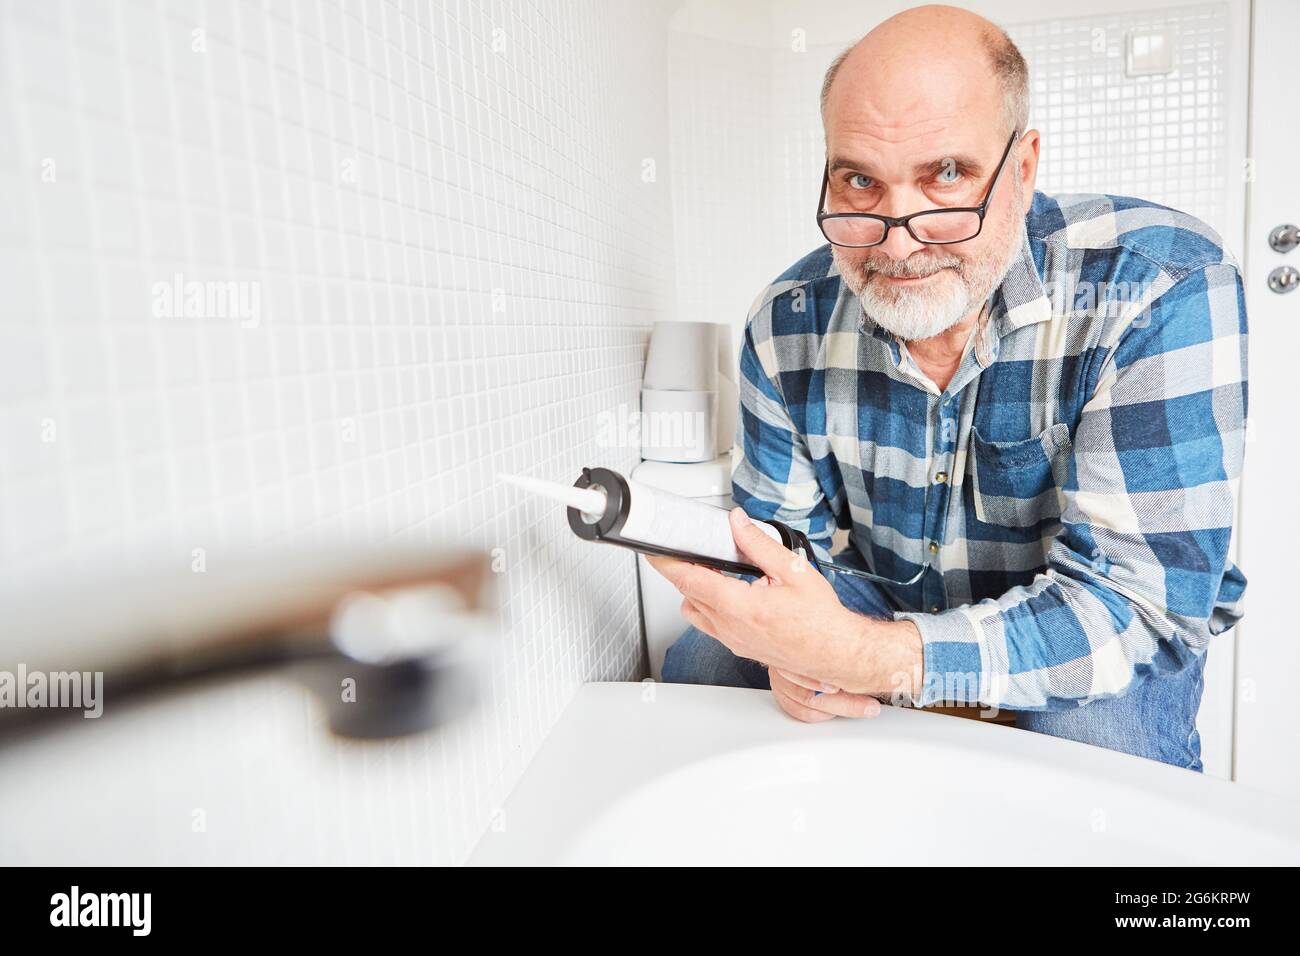 Craftsman or do-it-yourselfer with a cartridge press when sealing joints in the bathroom Stock Photo